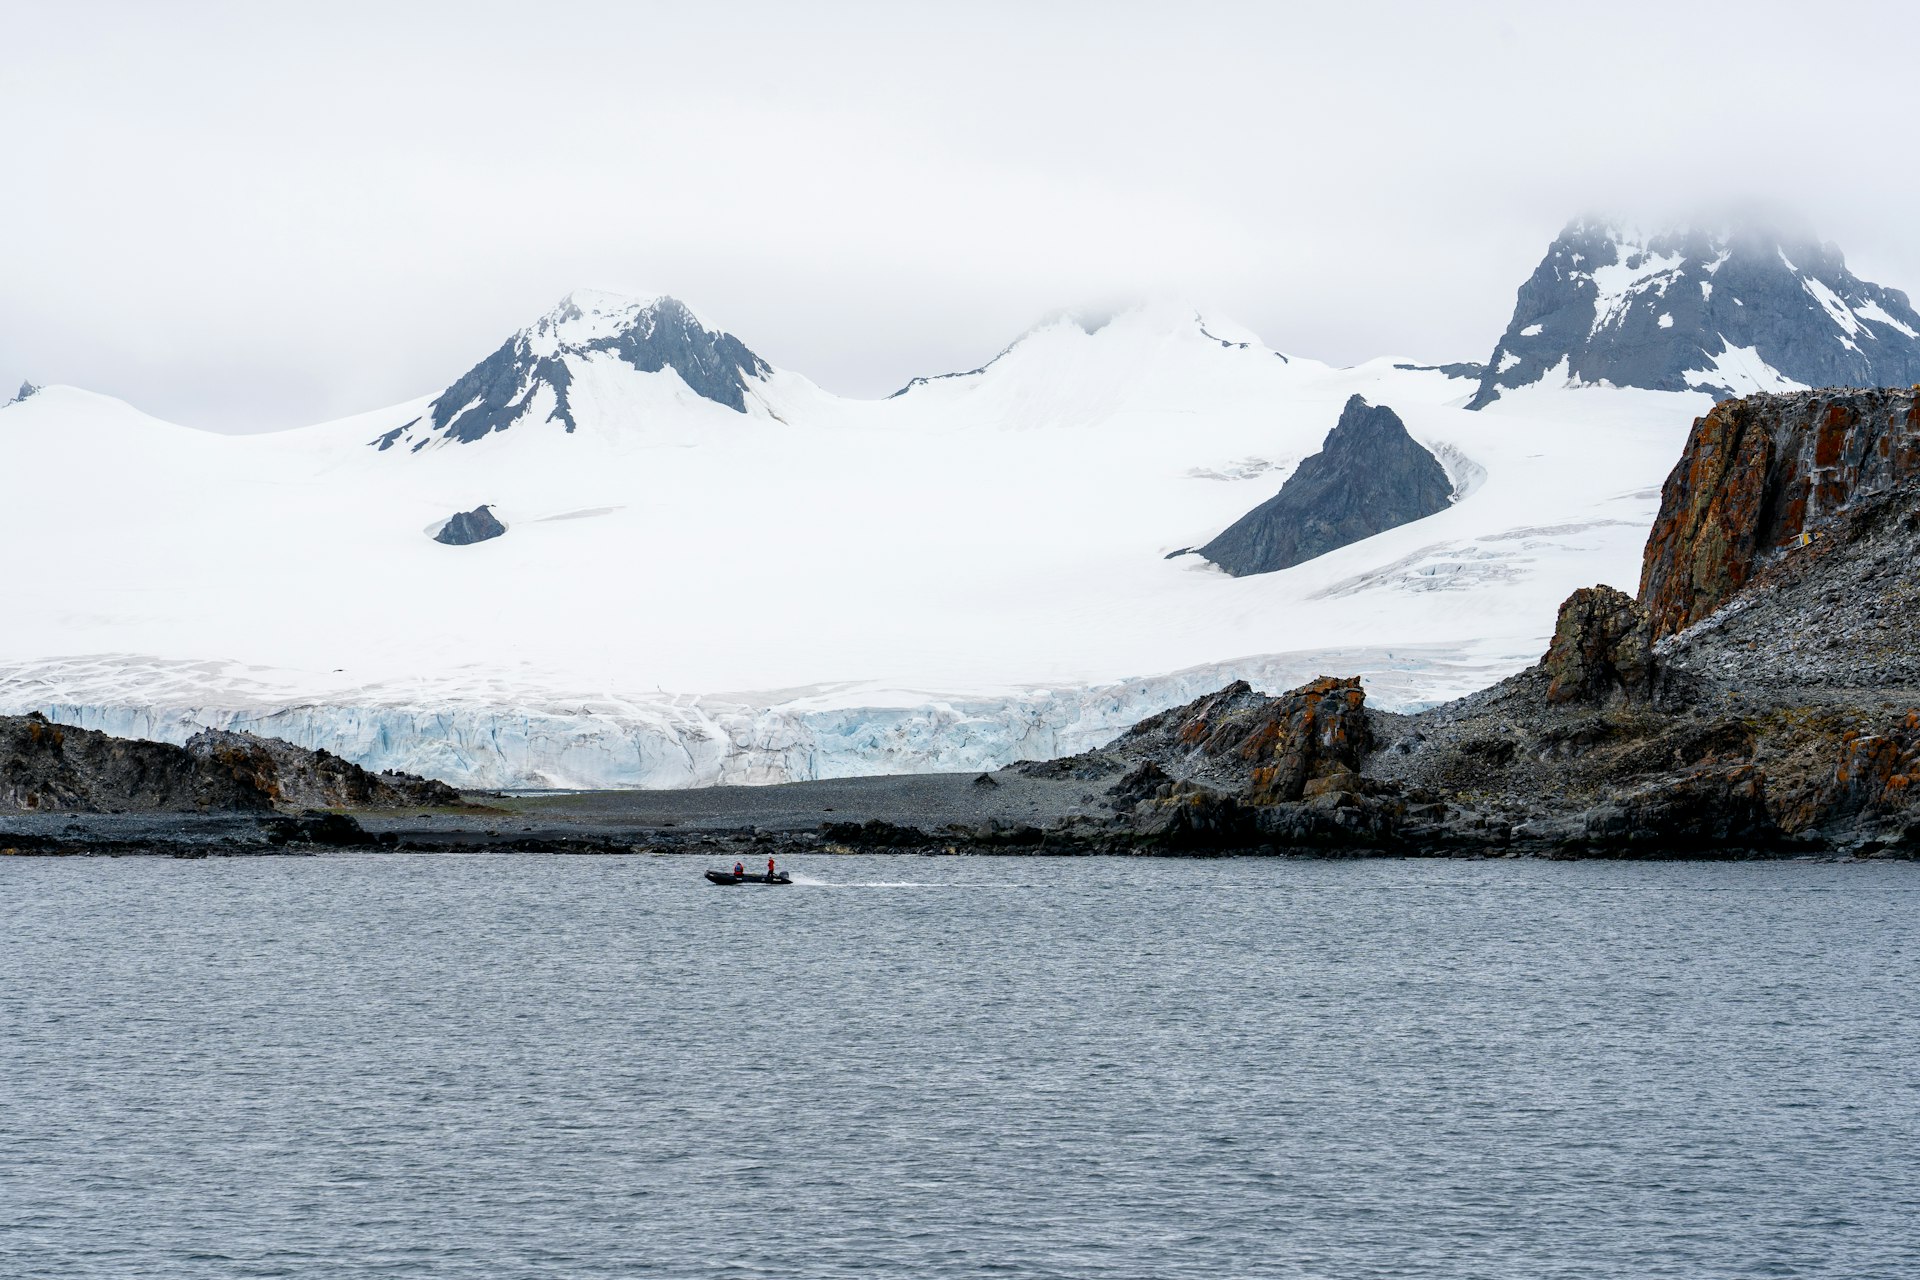 Boat driving past King George Island in Antartica.